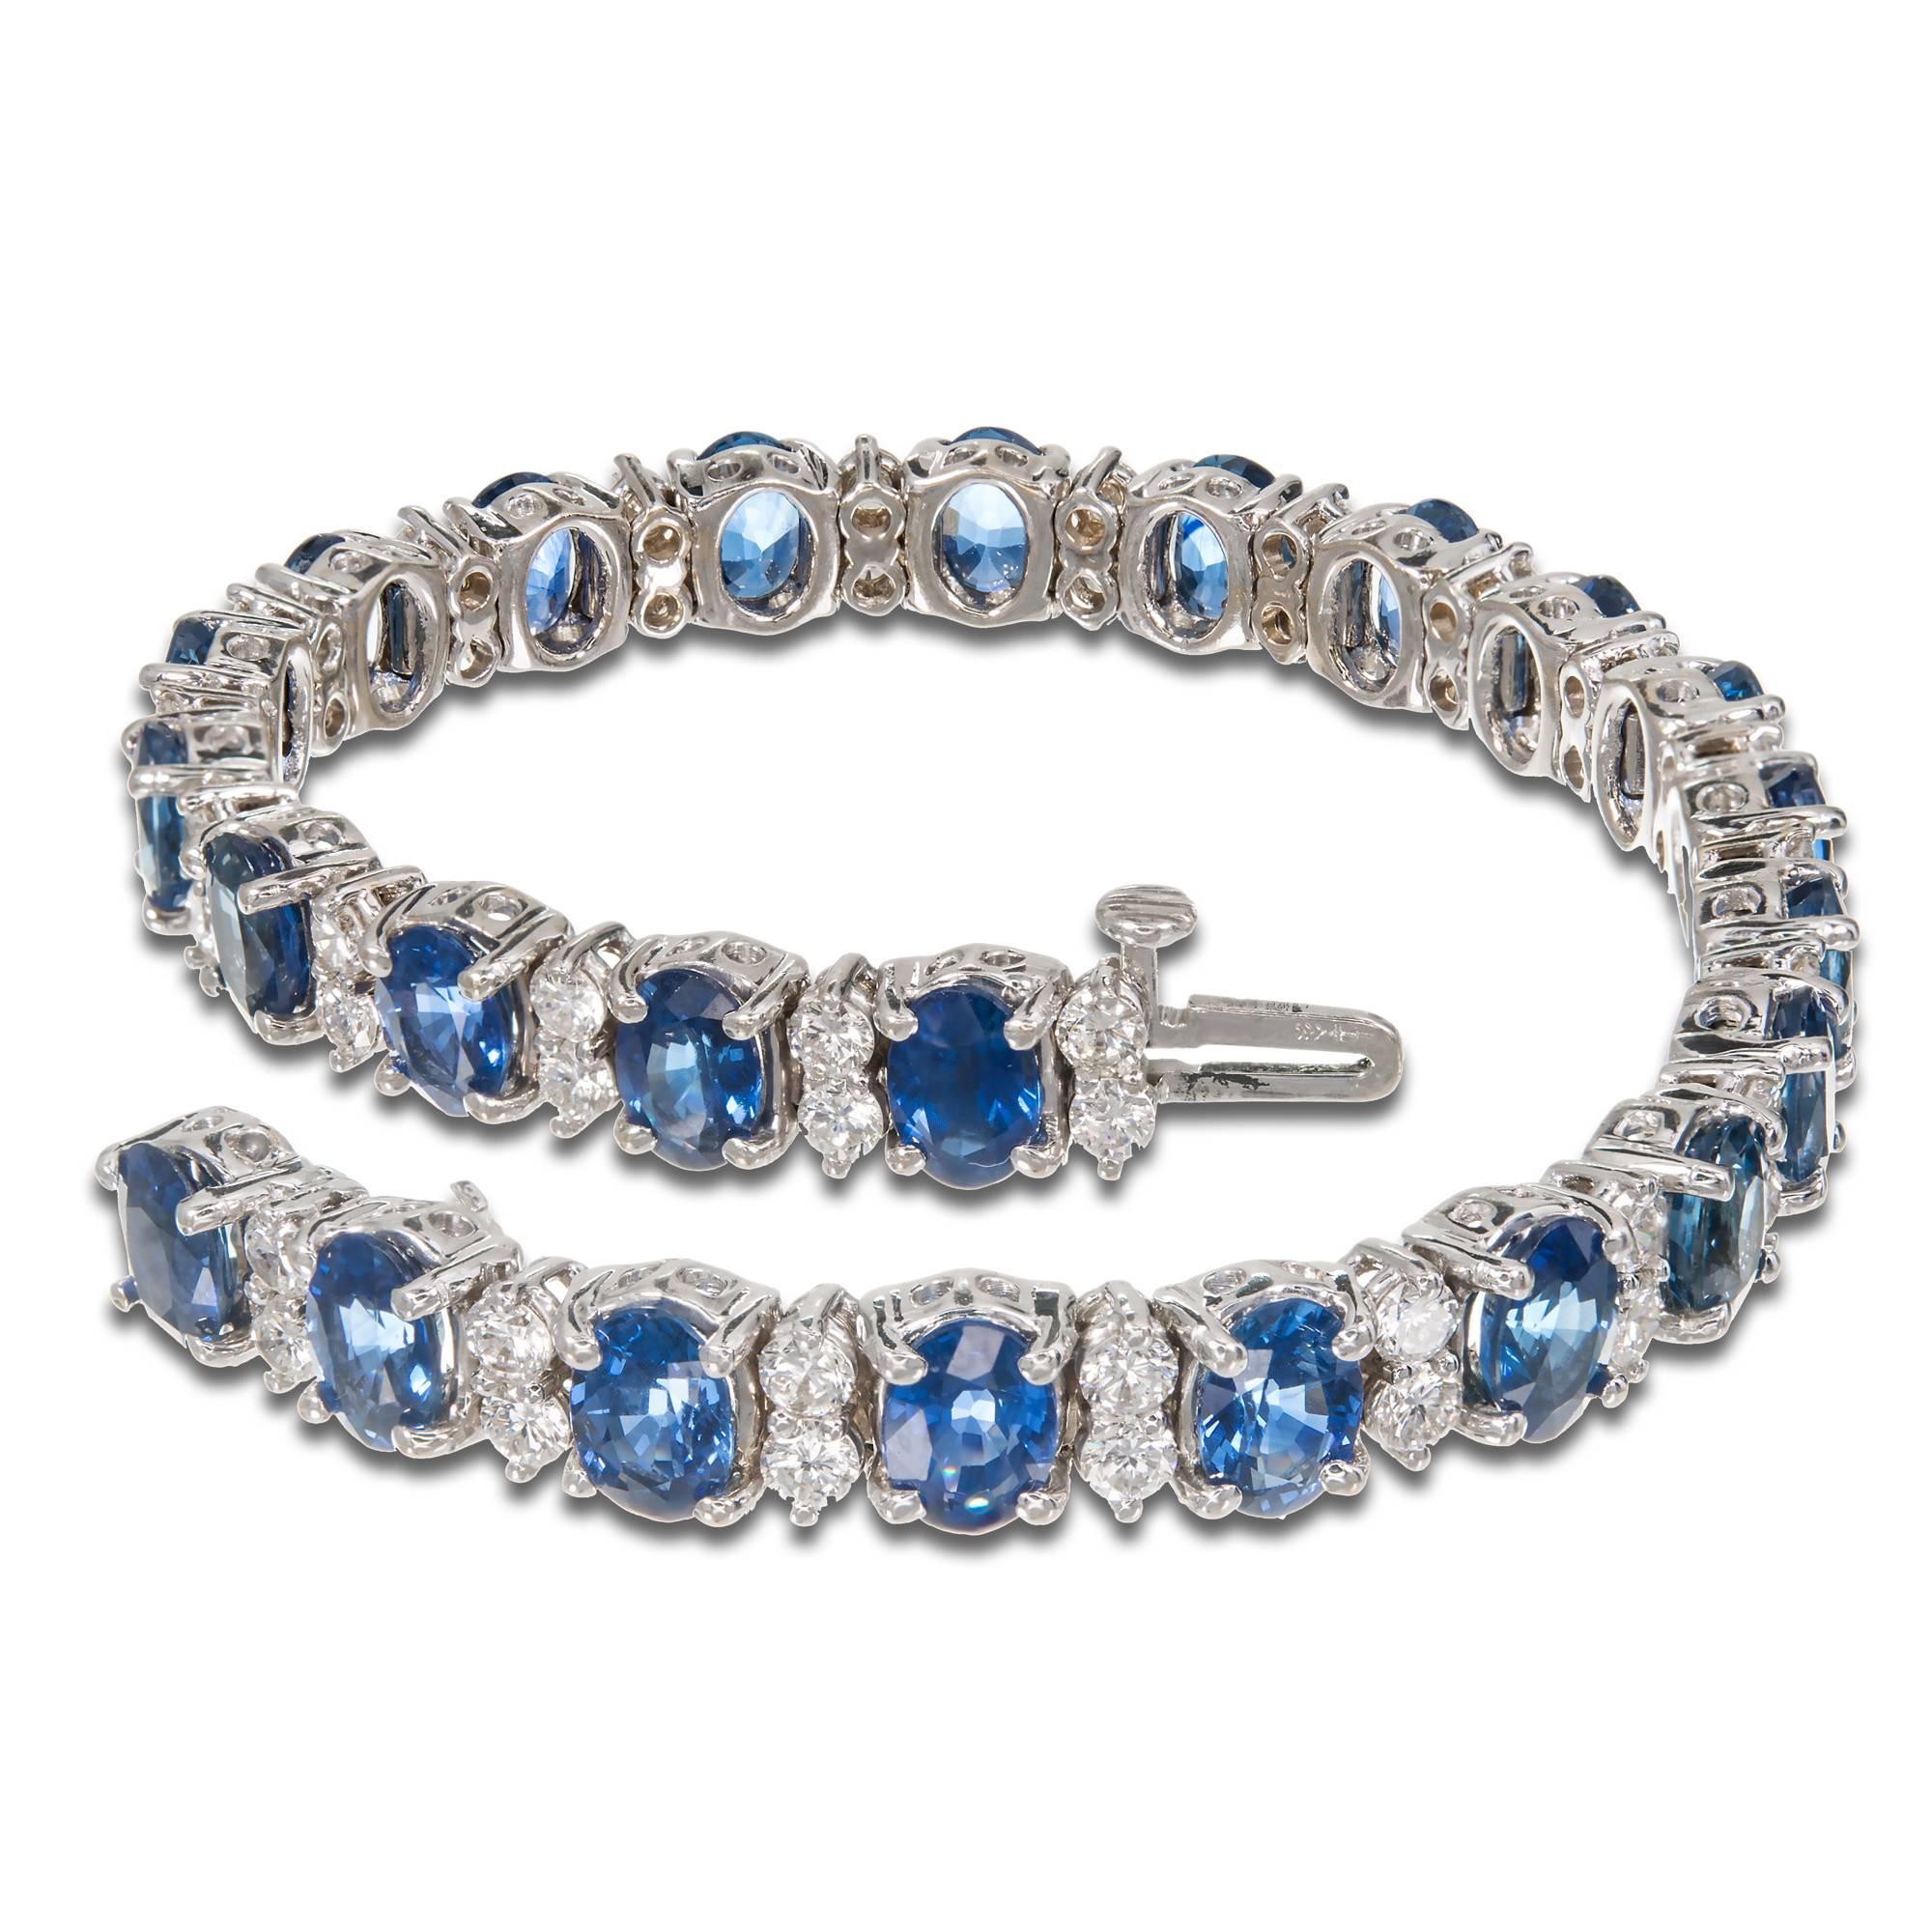 Hinged link 18k white gold bracelet with top cornflower blue bright sapphires and well cut fine white diamonds. Hidden catch and underside safety.

24 fine blue sapphires, approximately total weight 15.60cts, 6 x 4.4mm
48 full cut diamonds,